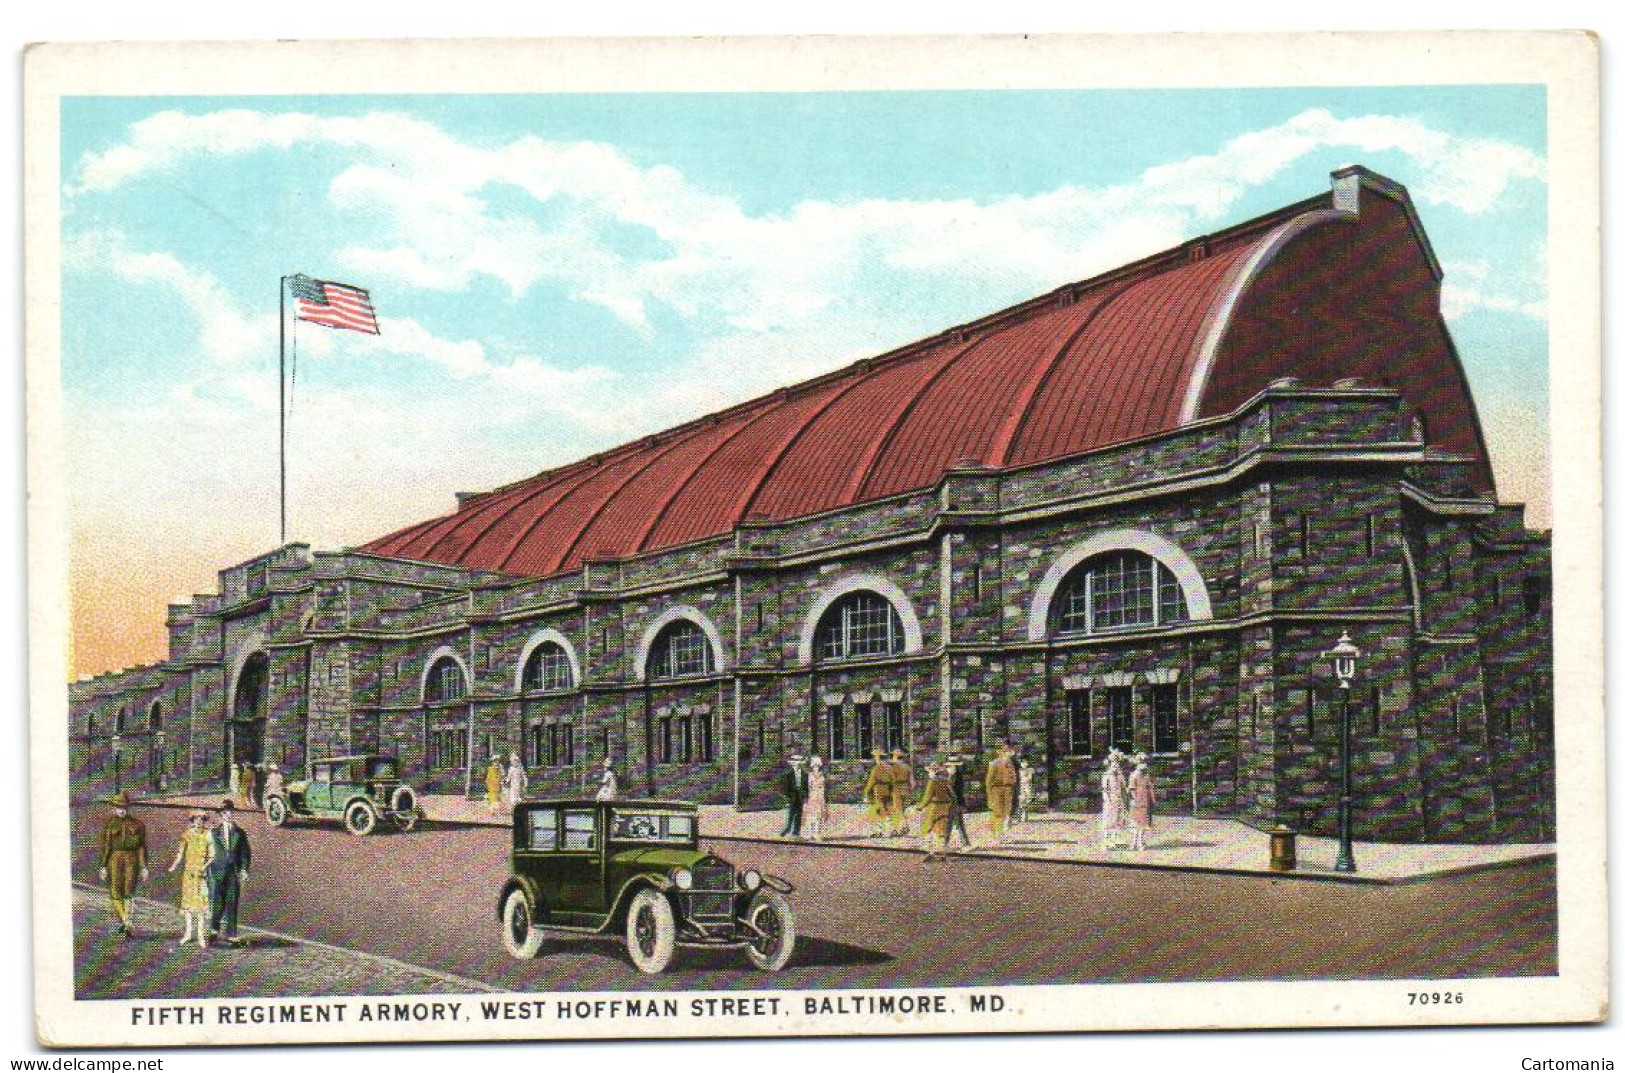 Fith Regiment Armory - West Hoffman Street - Baltimore MD - Baltimore